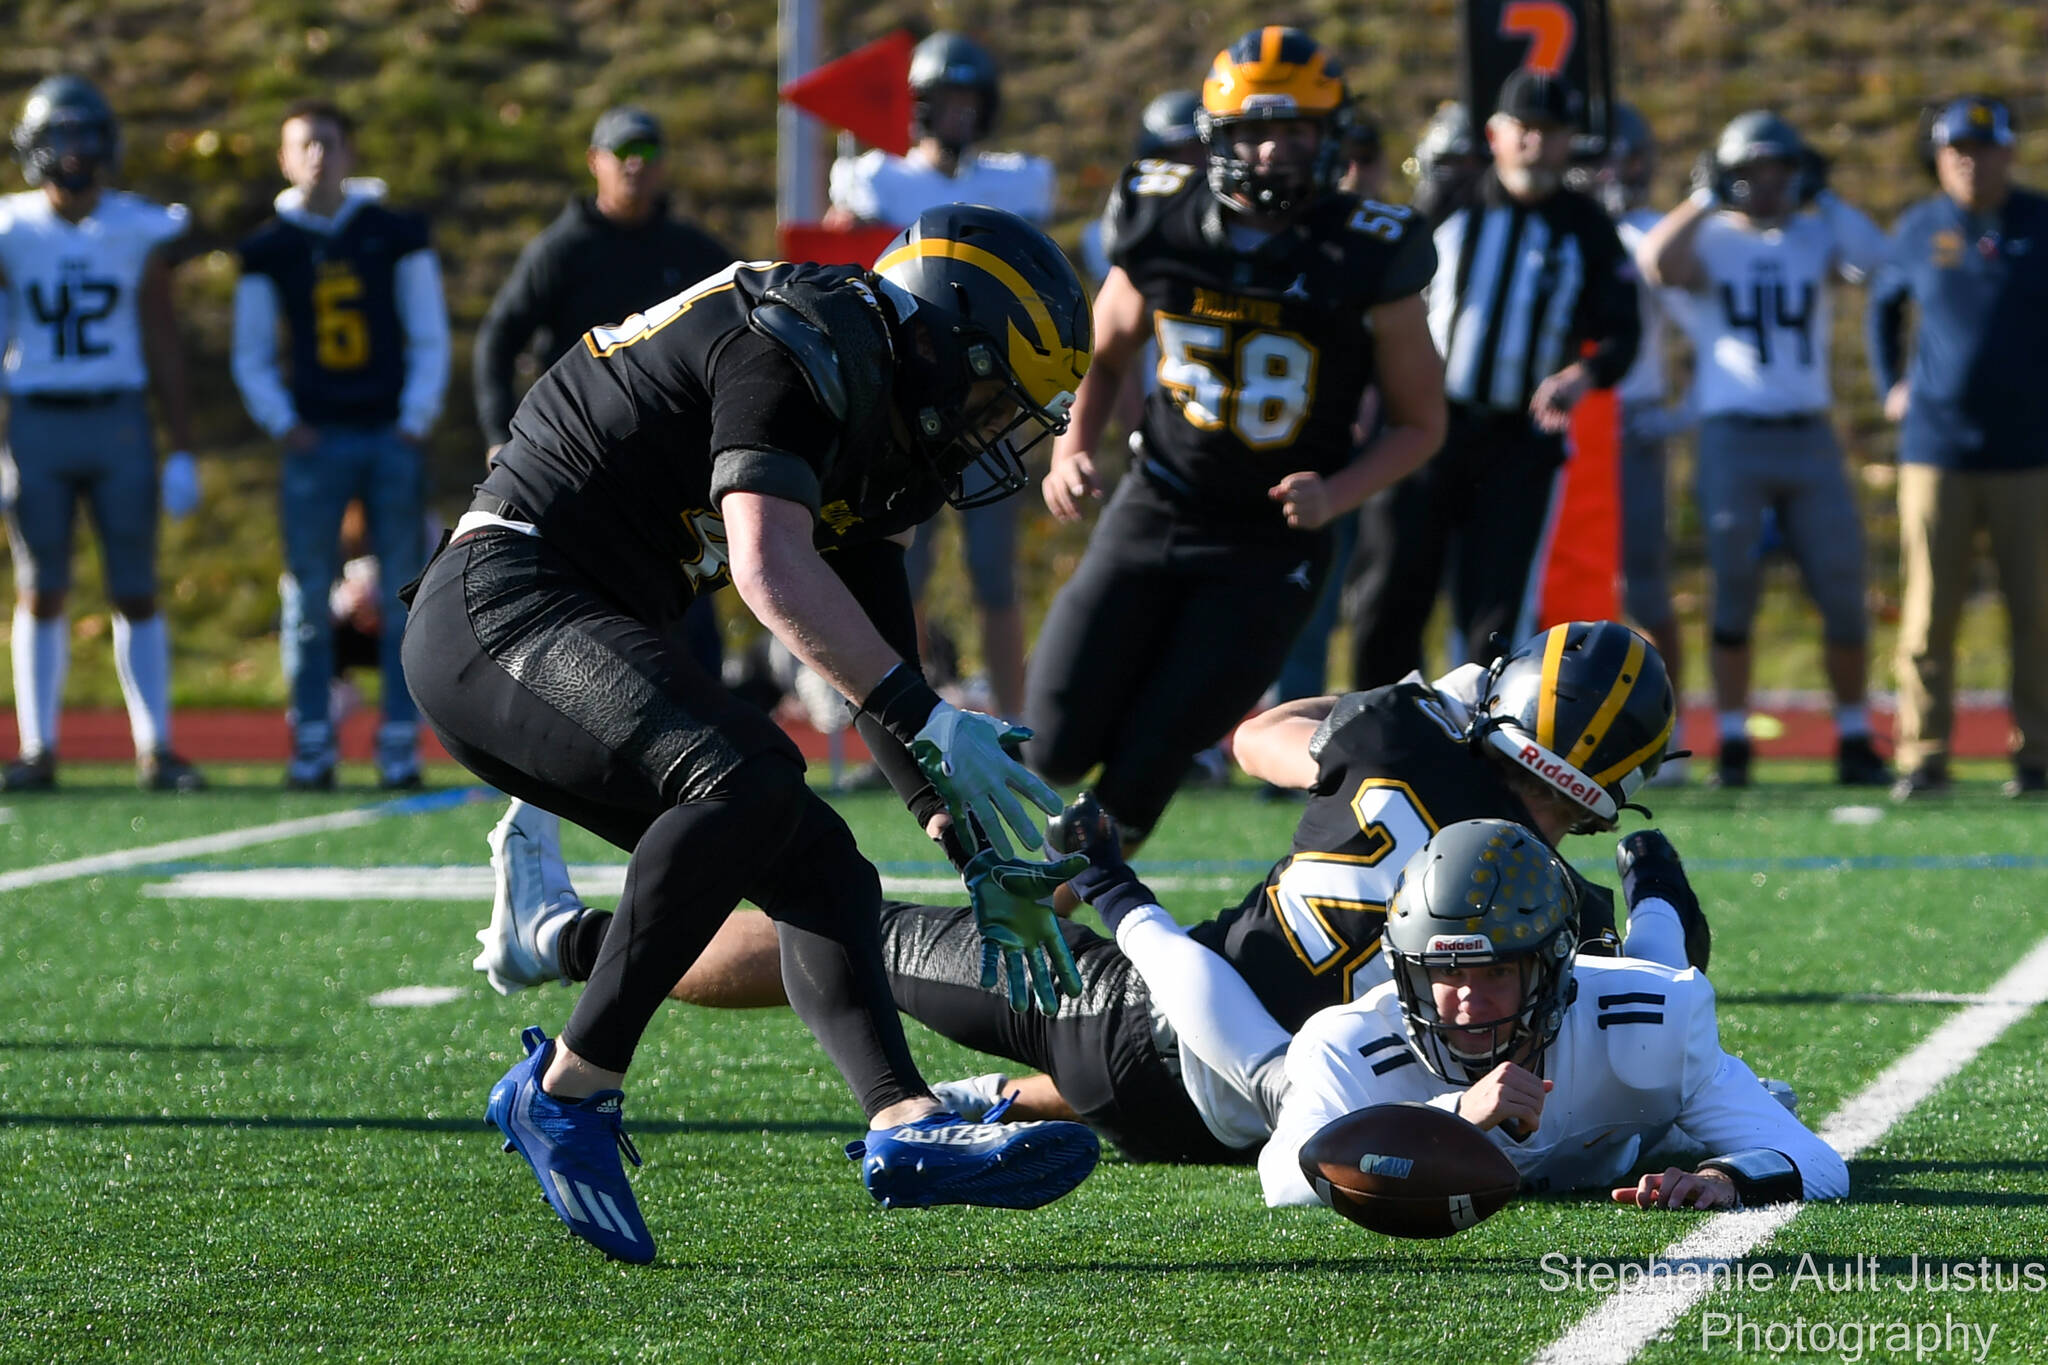 Bellevue junior Tate Hauser (#20) tackles Mead’s quarterback, Colby Danielson (#11), who fumbles the ball. November 12, 2022. Courtesy of Stephanie Ault Justus.